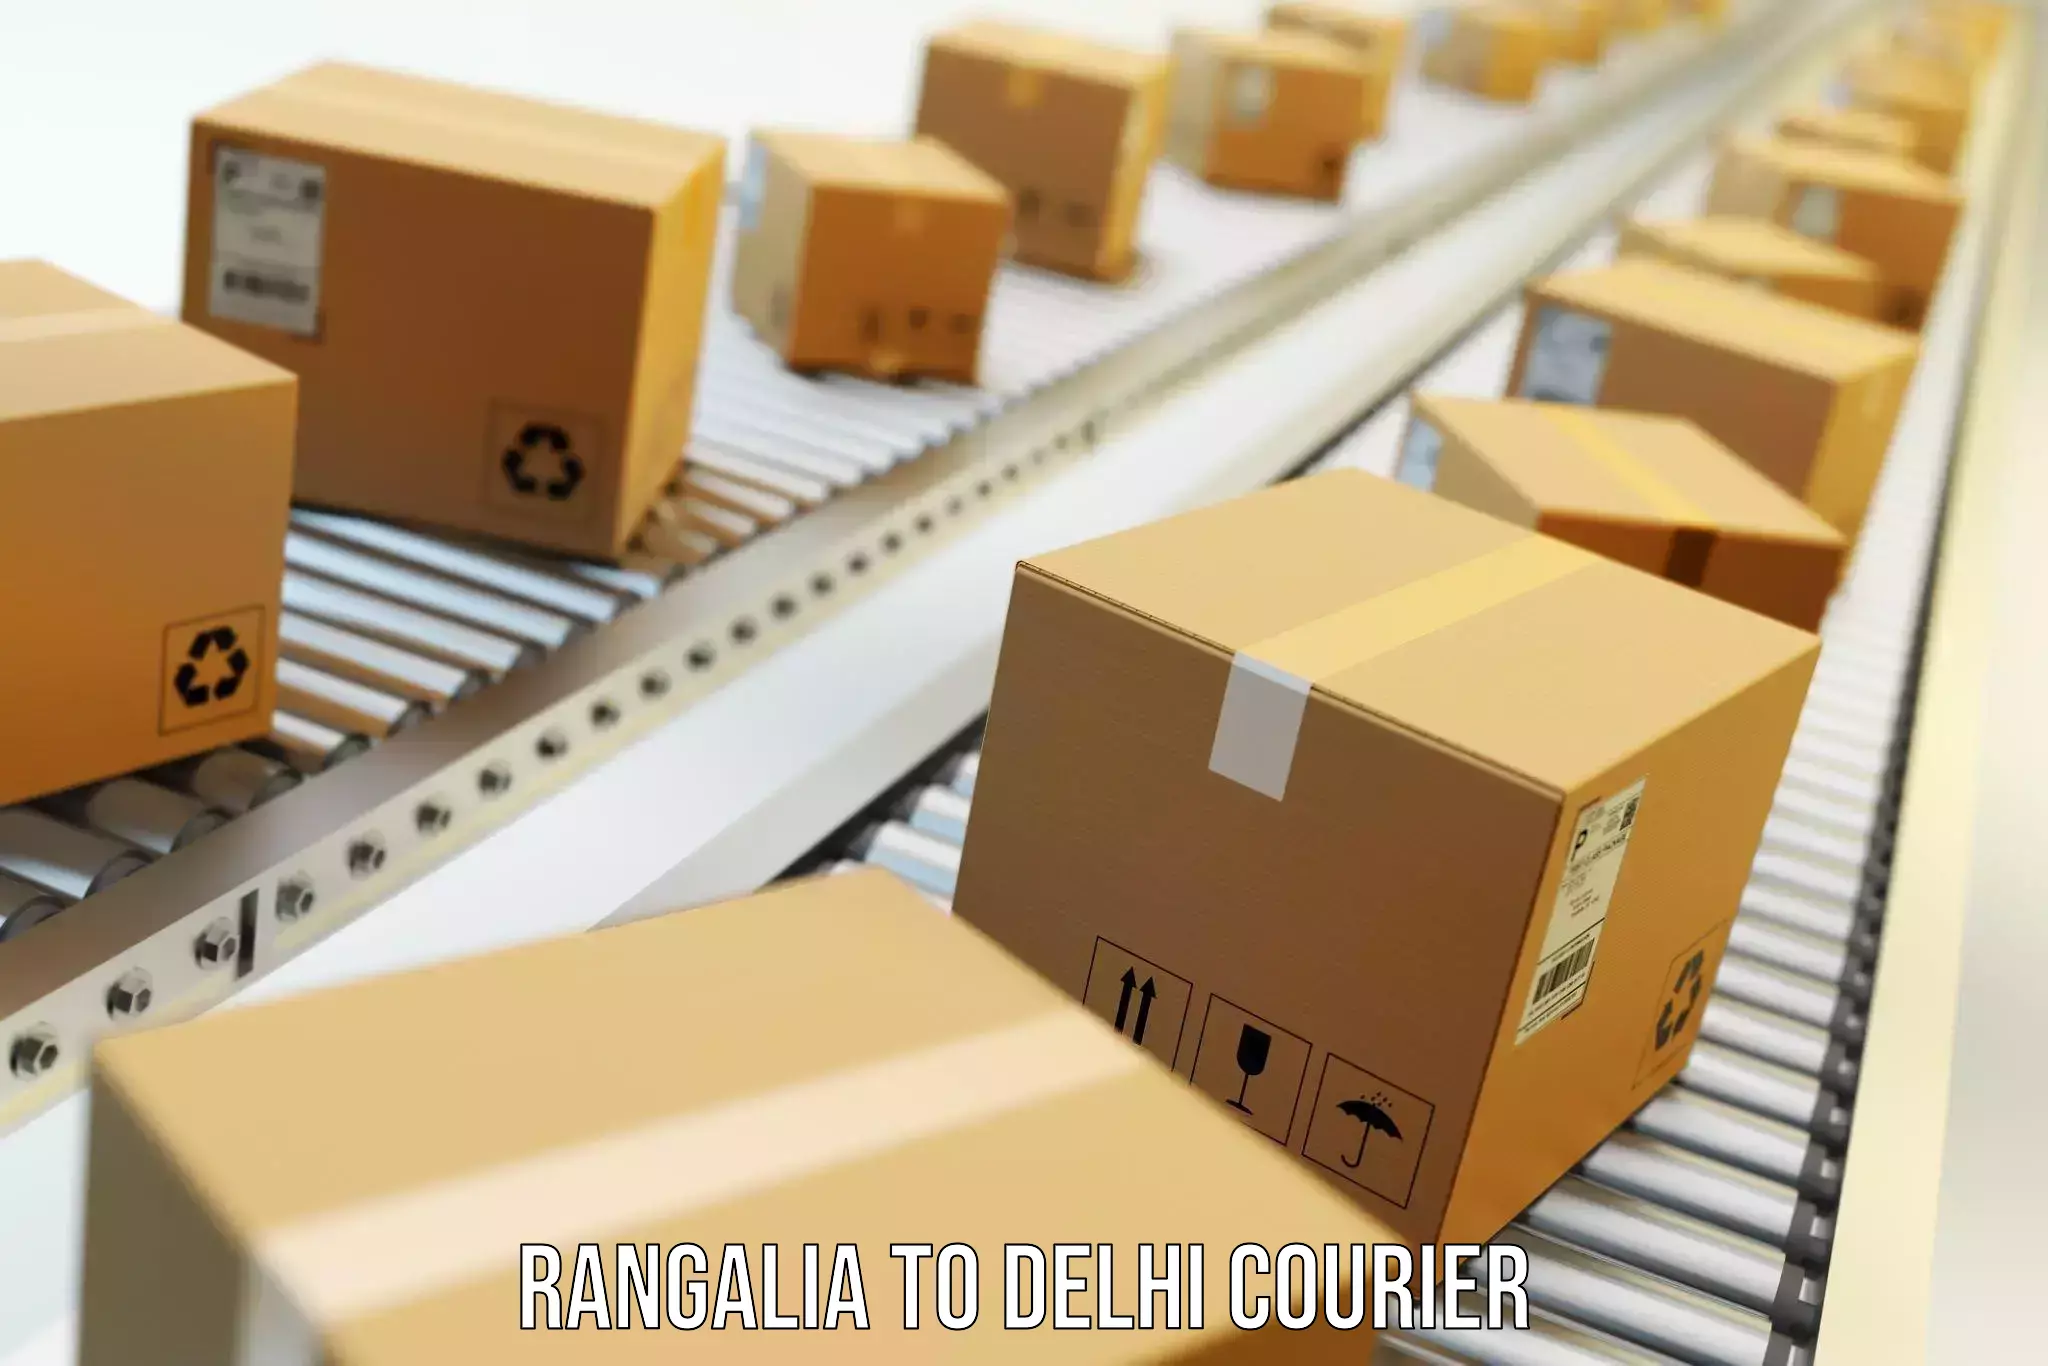 Moving and handling services Rangalia to IIT Delhi